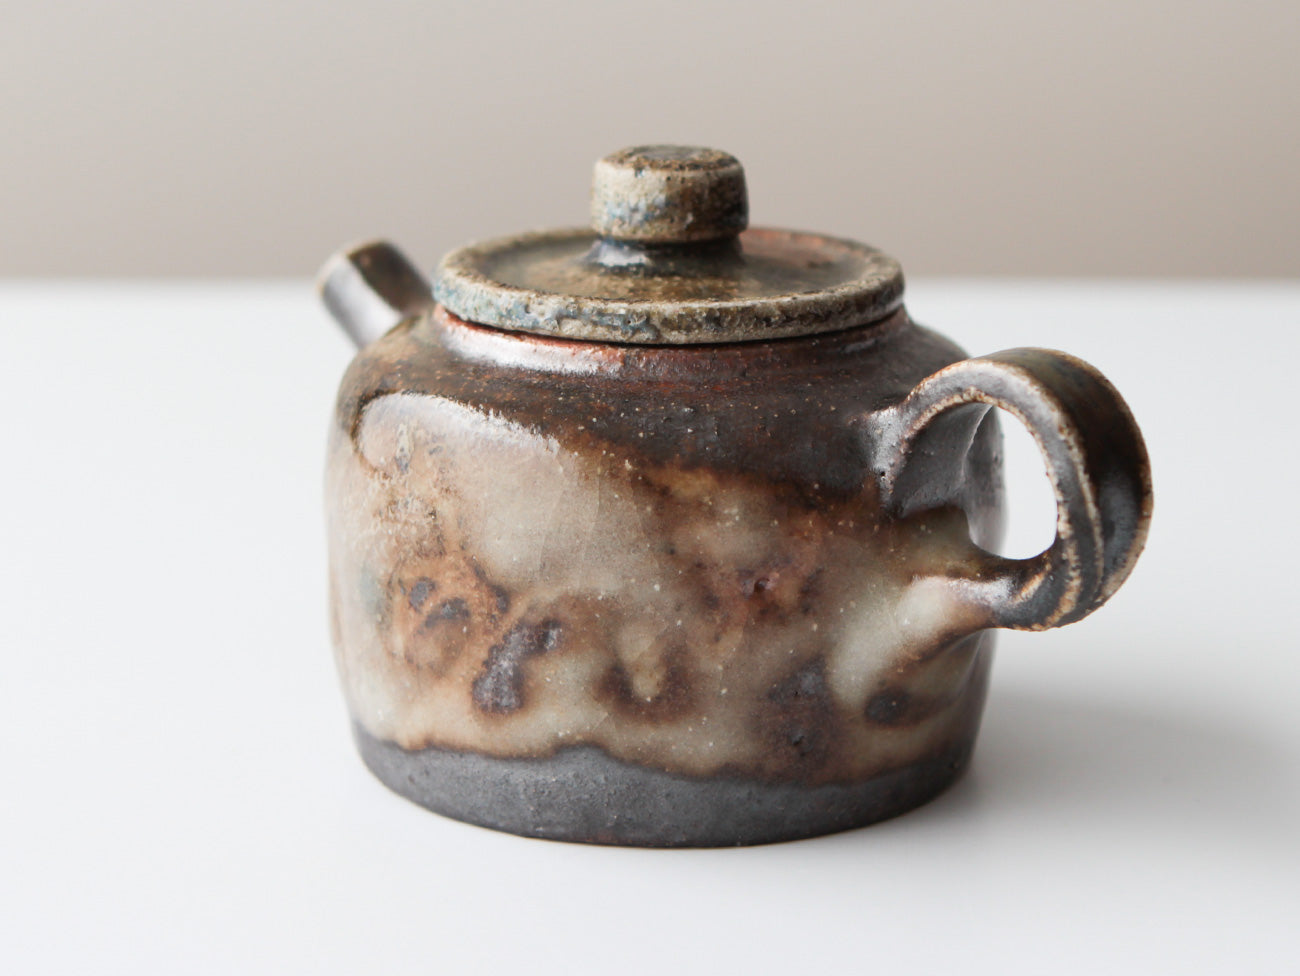 14 Day Fired Teapot, No. 2